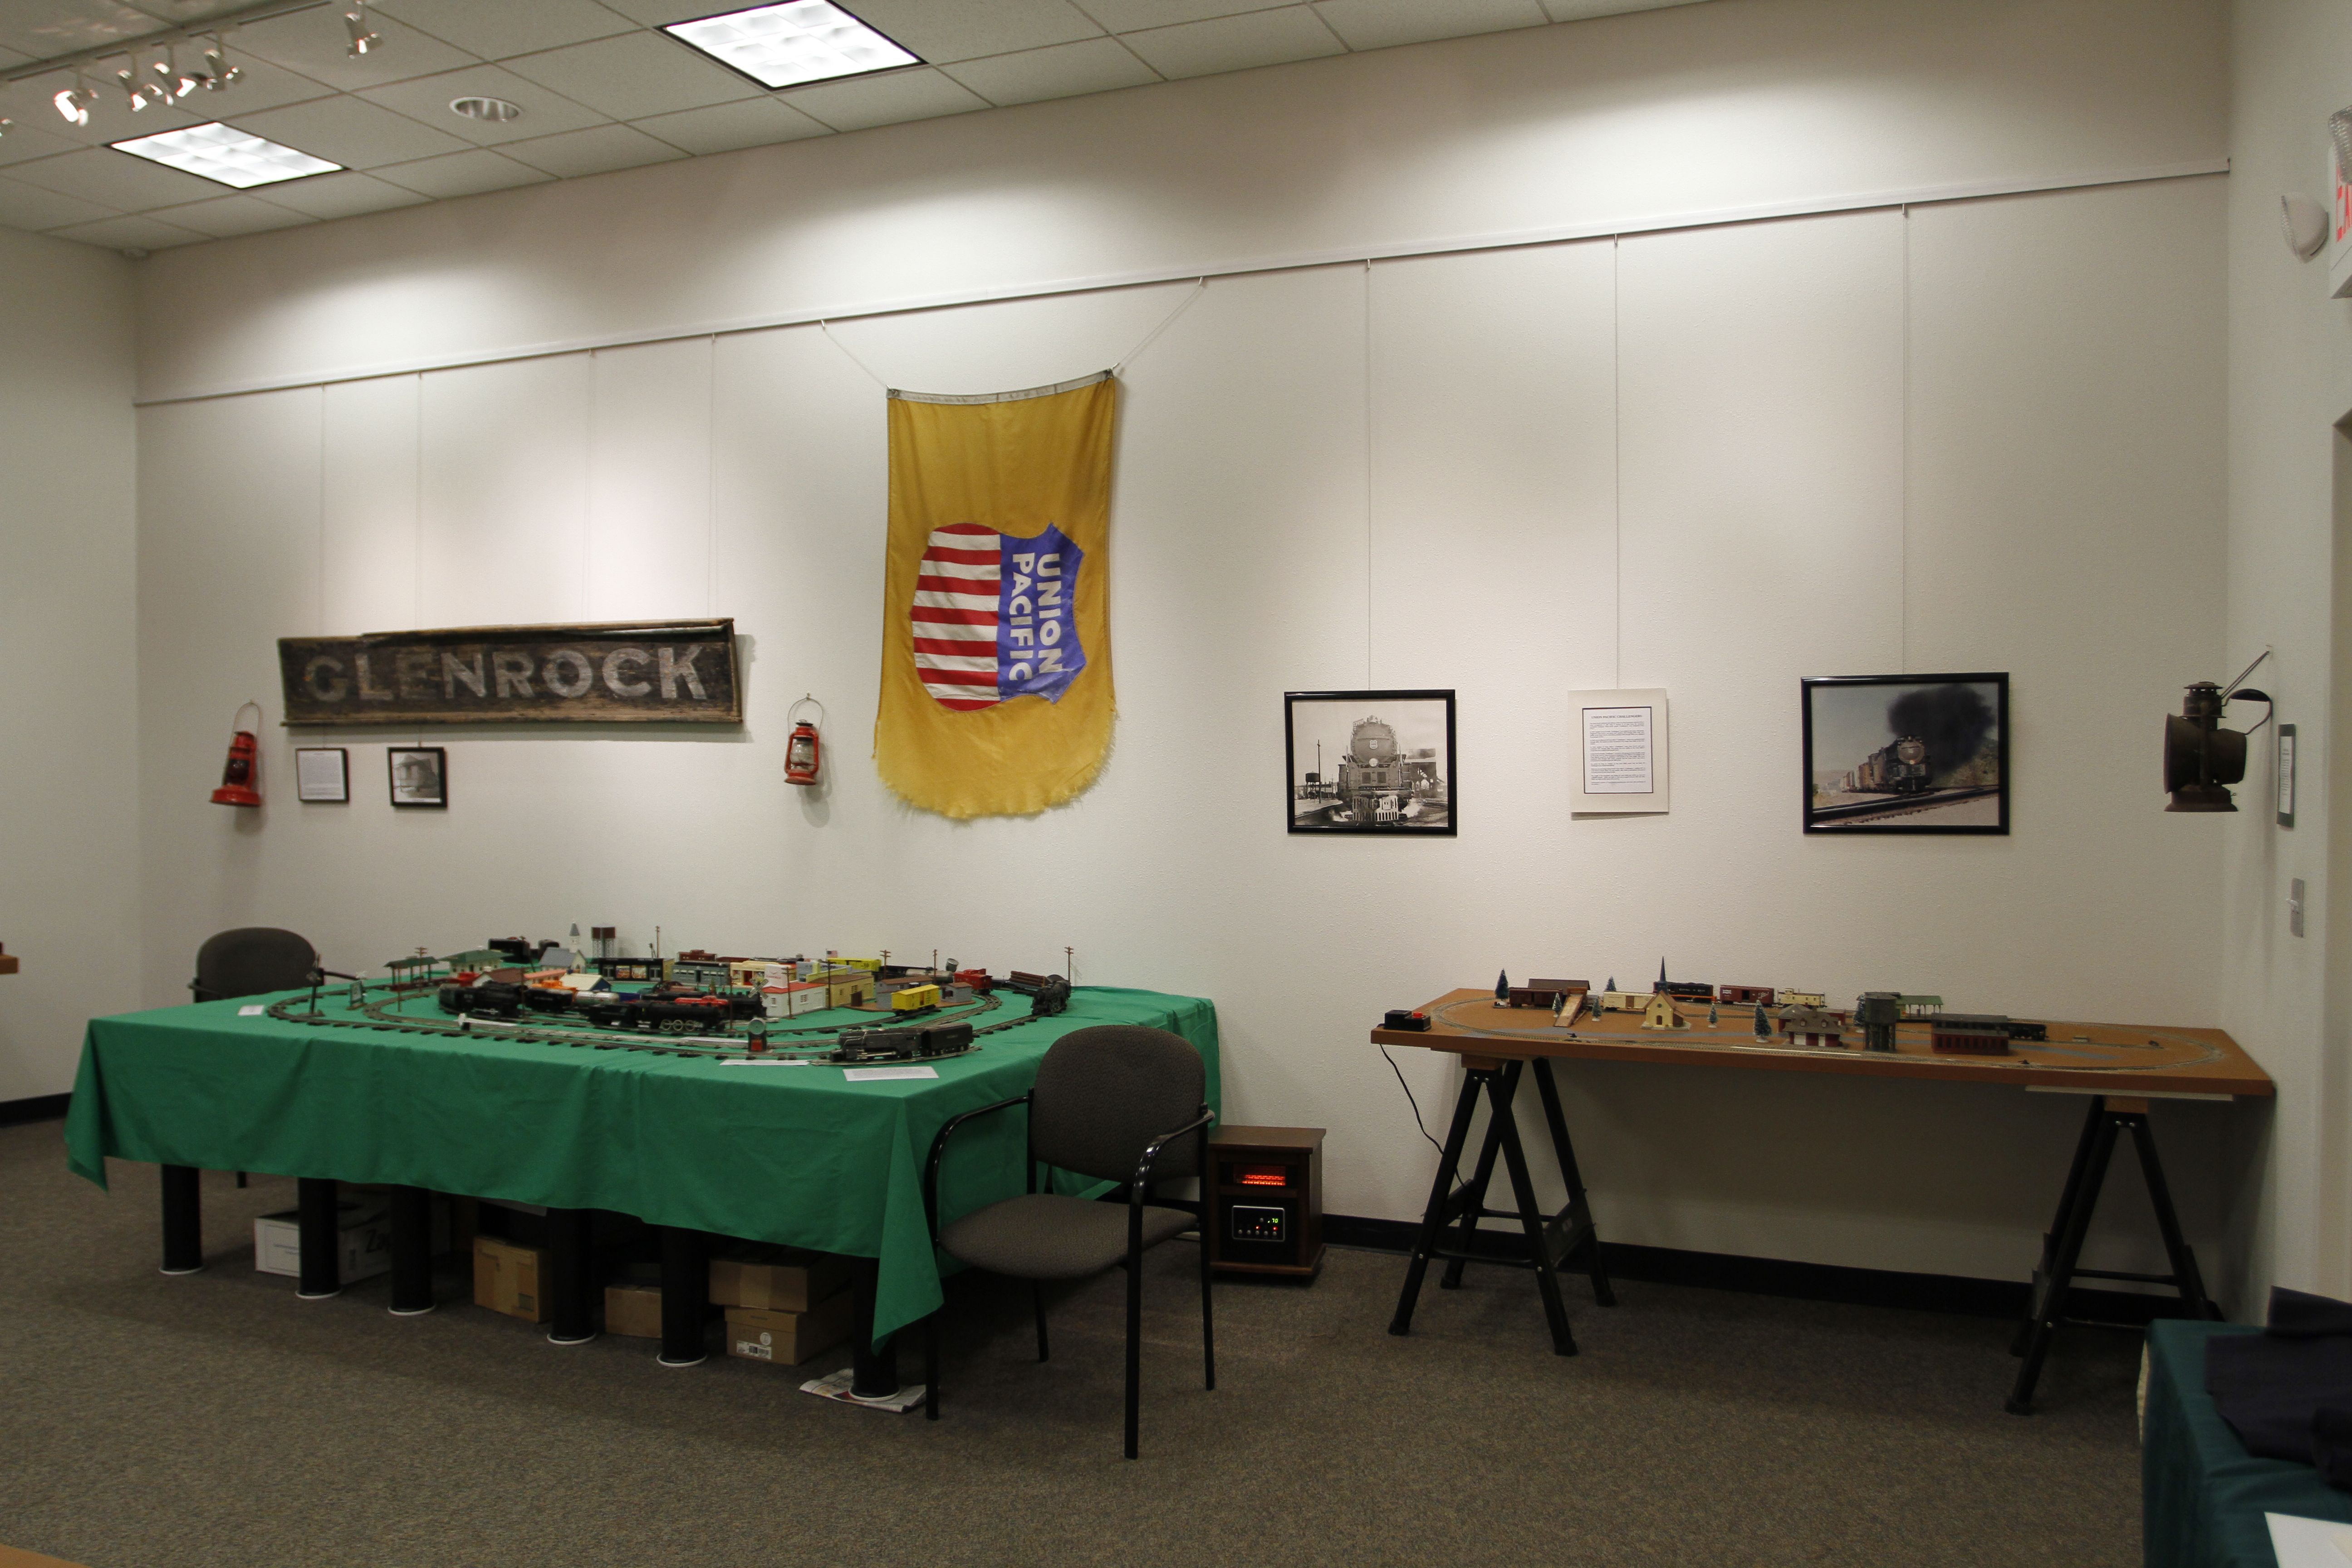 Photos from the NHTIC display in December, 2012